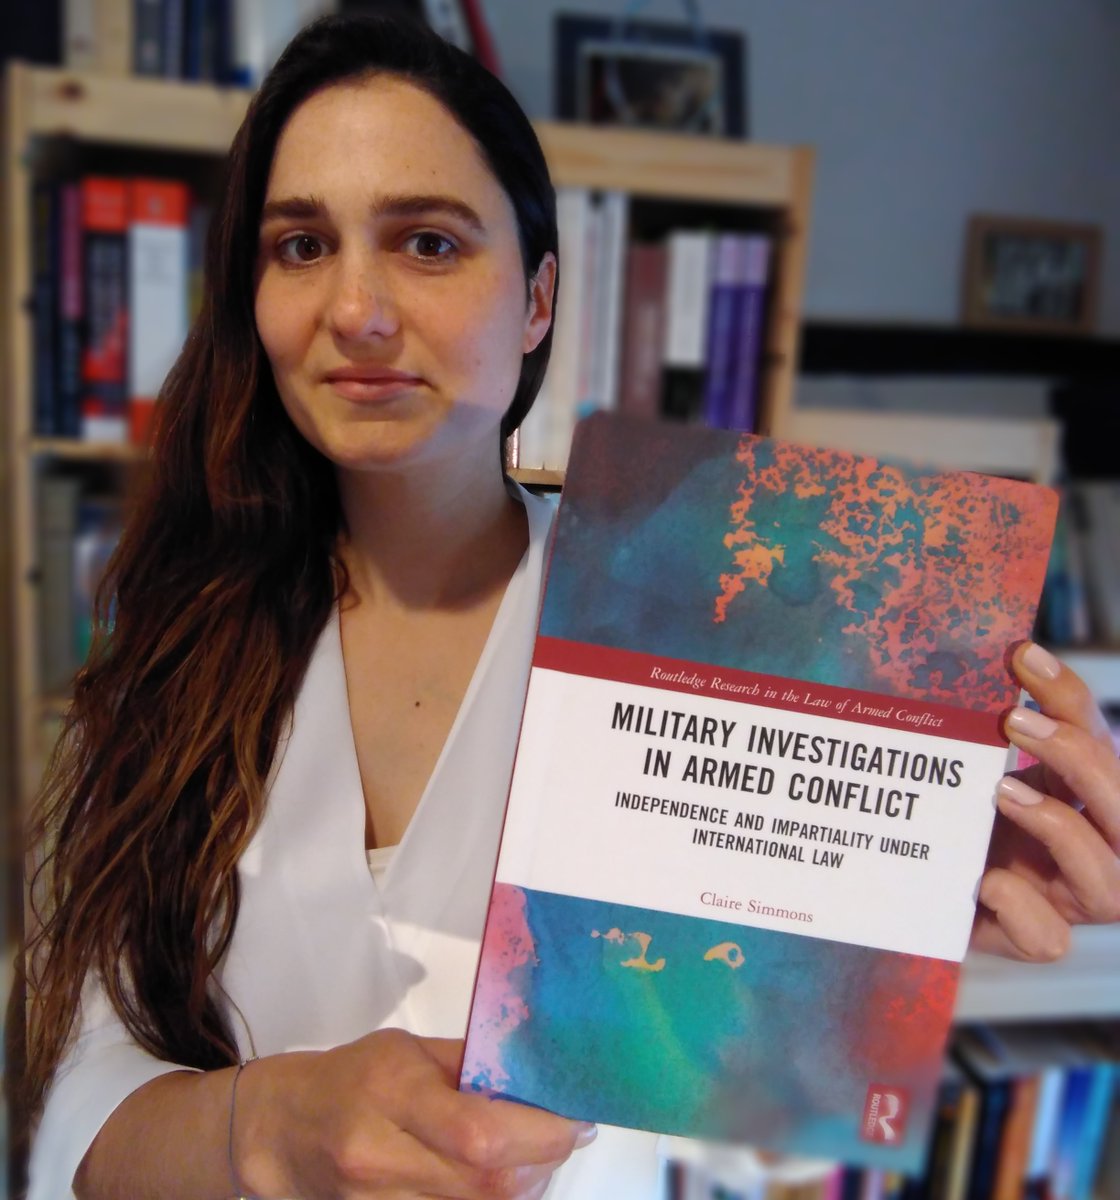 Proudly presenting my book which has just been published with @routledgebooks. Addresses the legal questions surrounding militaries 'investigating themselves' for war crimes and other. Book launch to follow soon! routledge.com/Military-Inves…